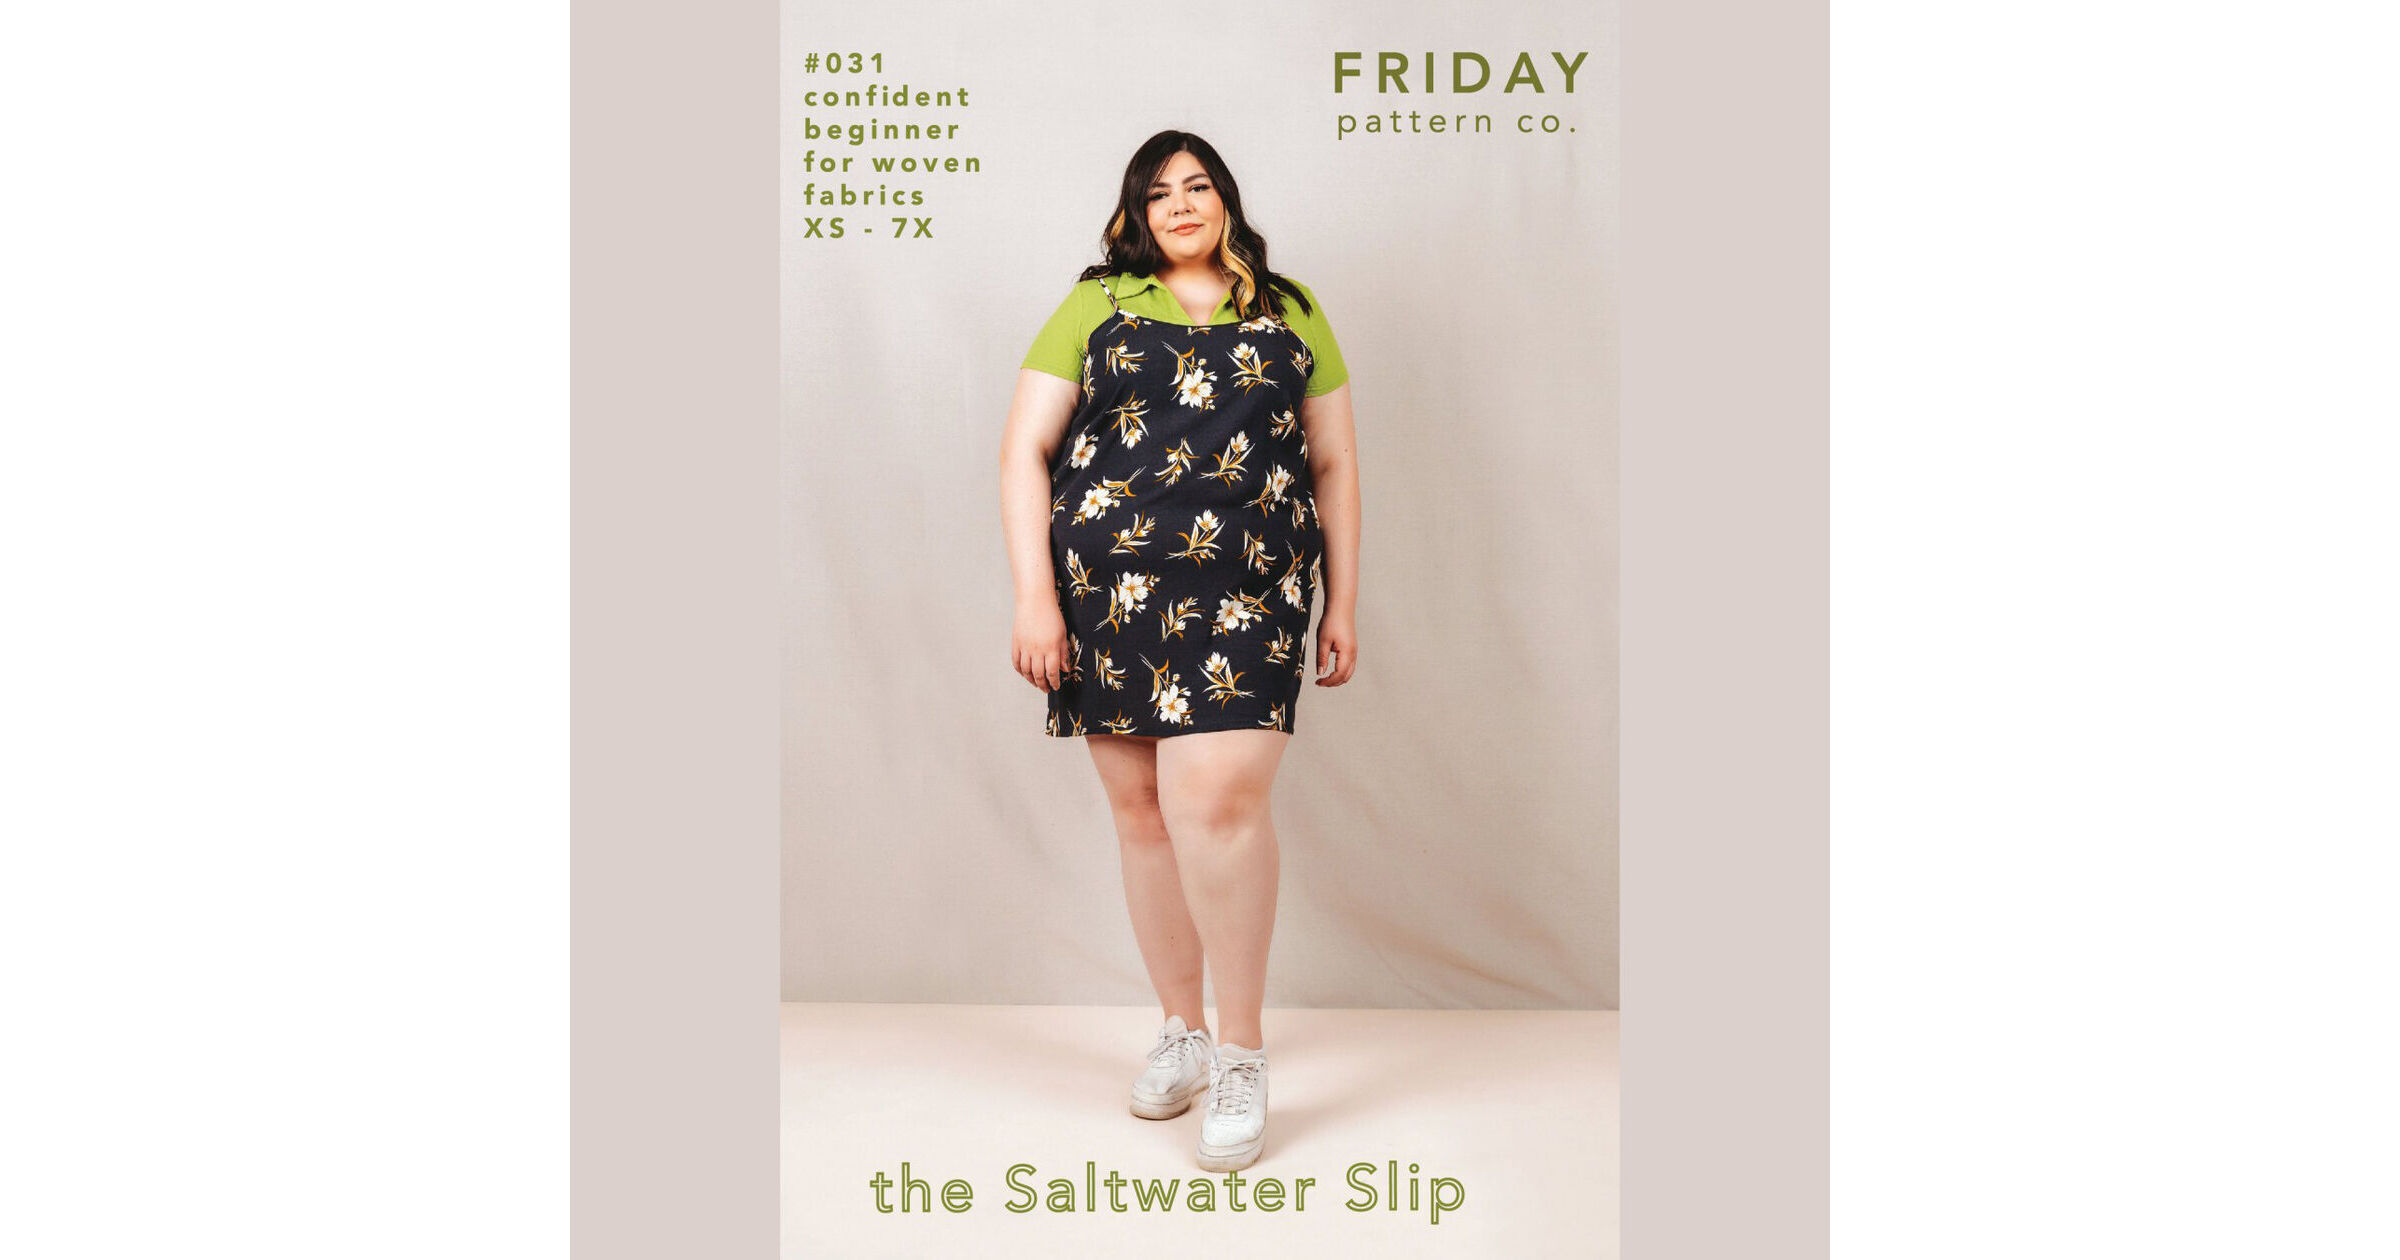 The Saltwater Slip Dress Sewing Pattern, Size XS-7X, From Friday Pattern  Company NEW, Please See Description and Pictures for More Info 